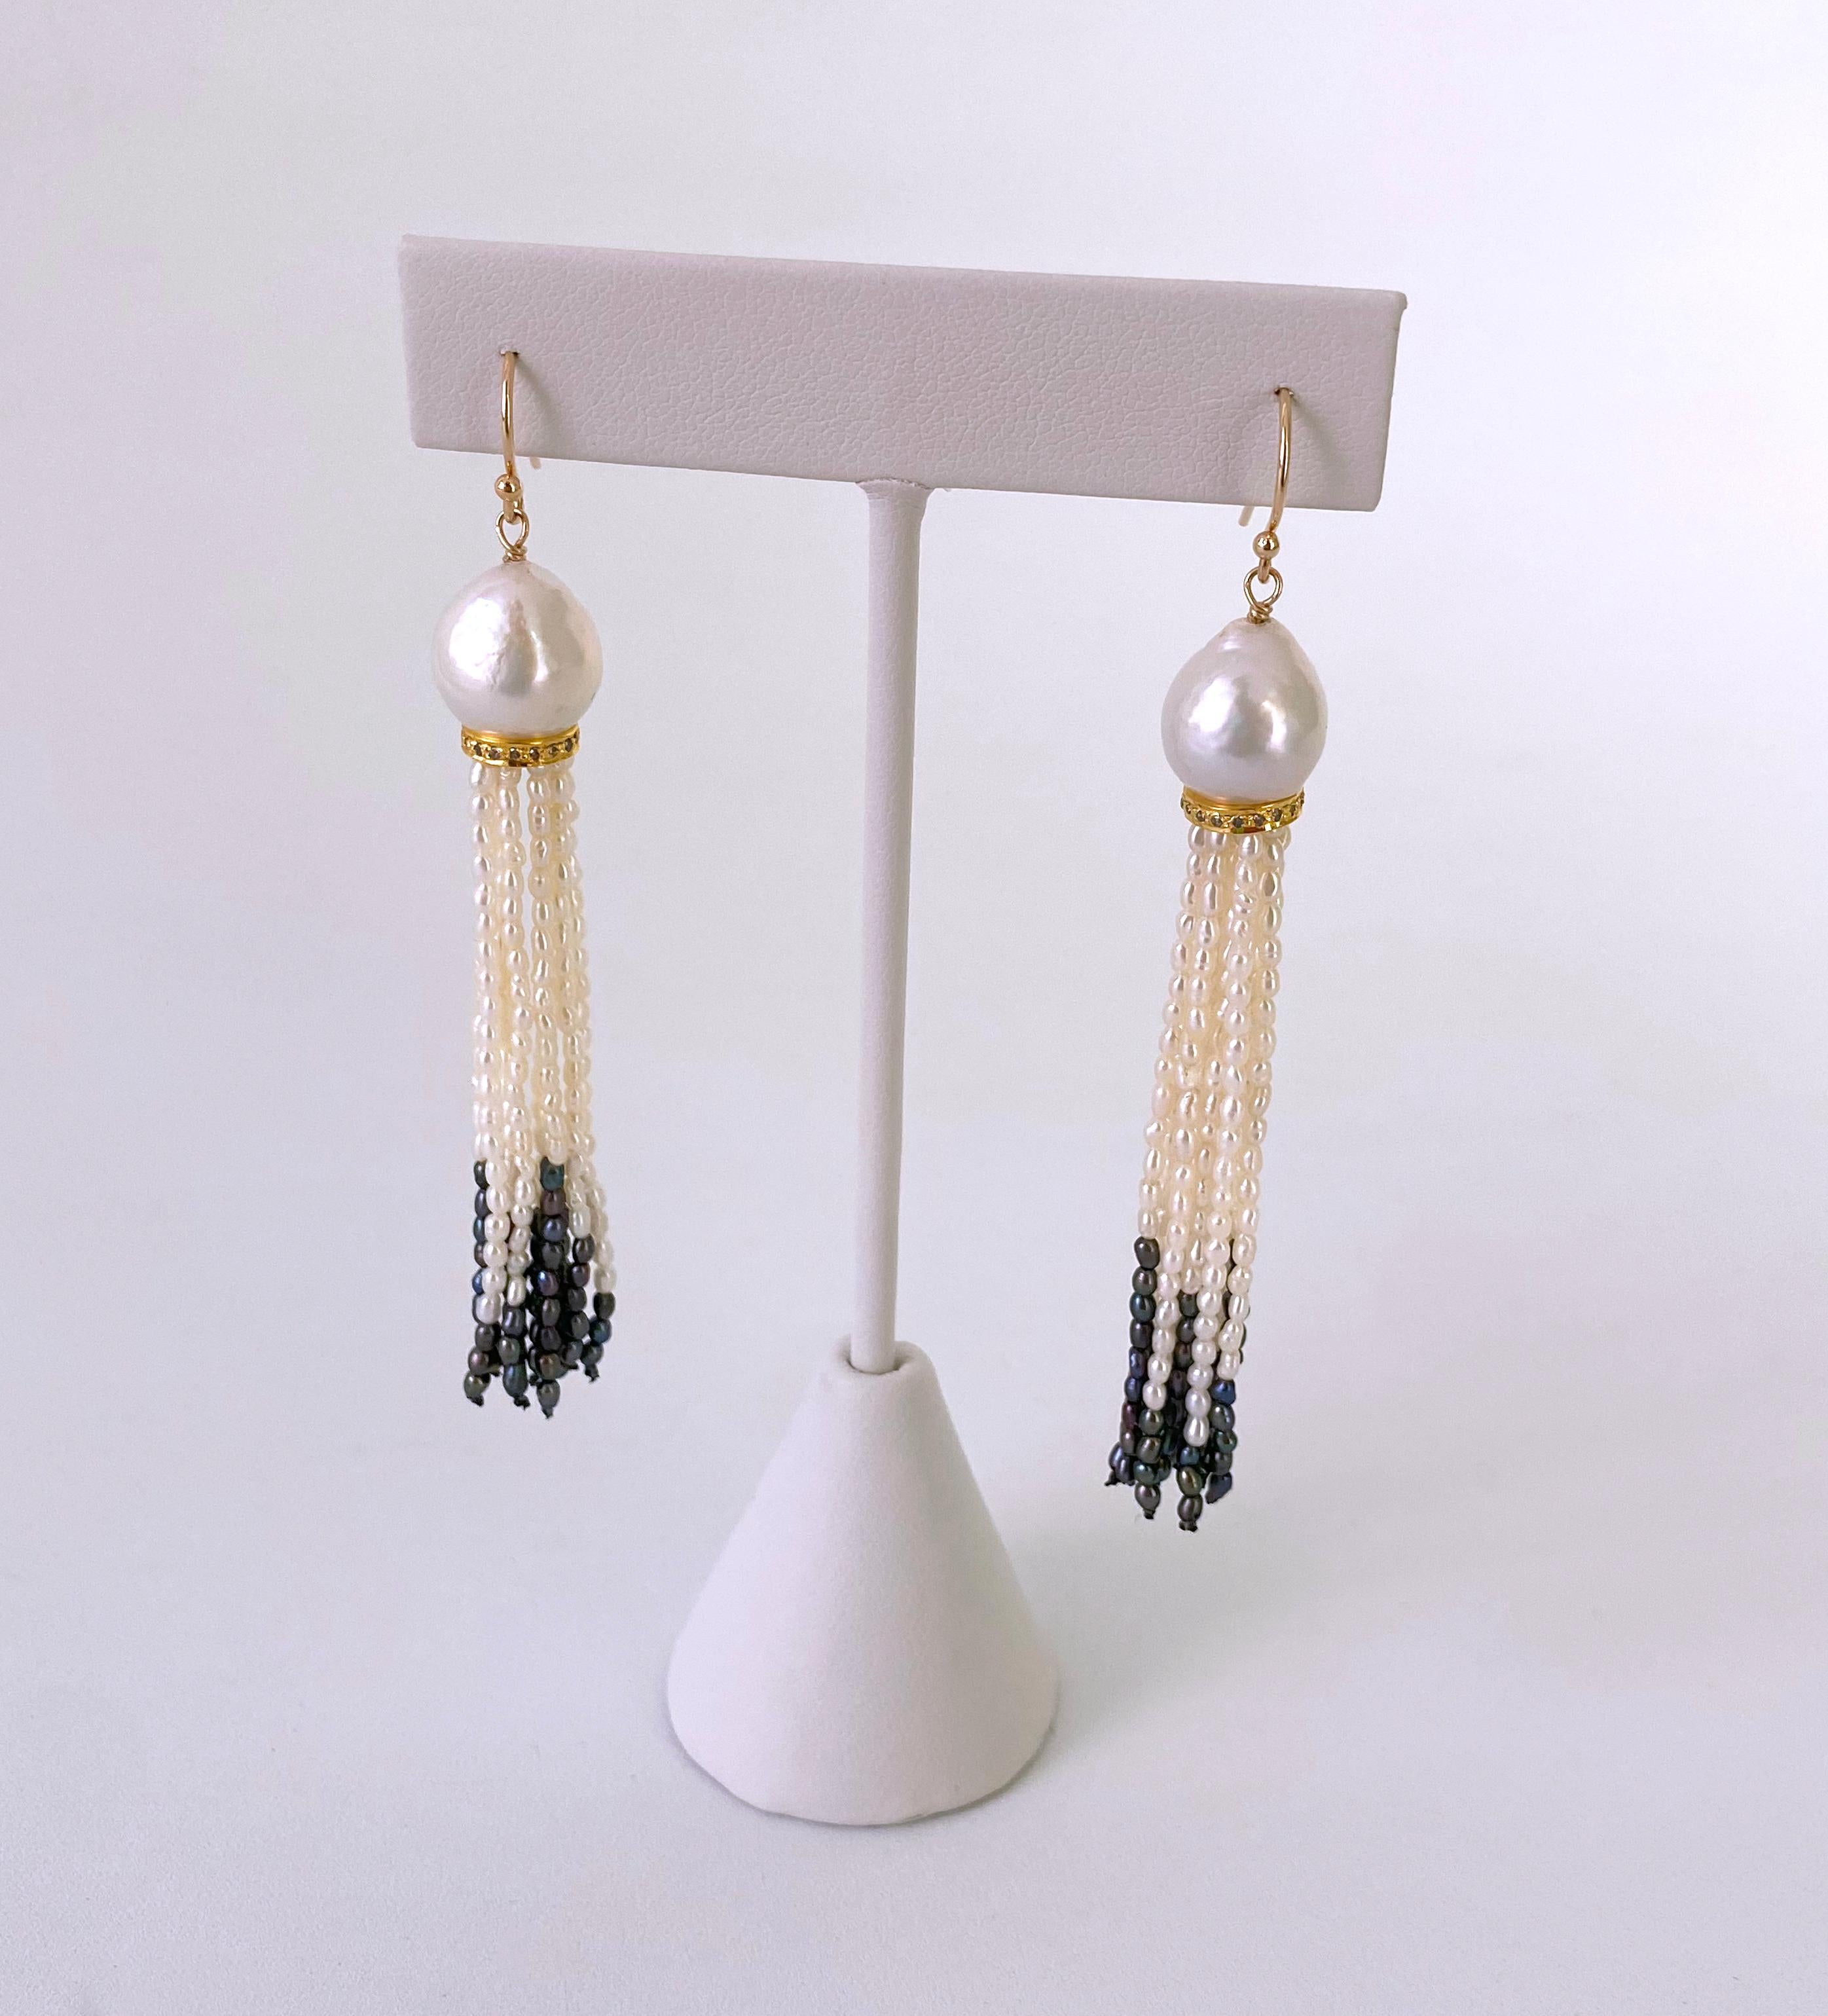 Artisan Marina J. Solid 14k & Pearl Earrings with Ombre Tassels For Sale